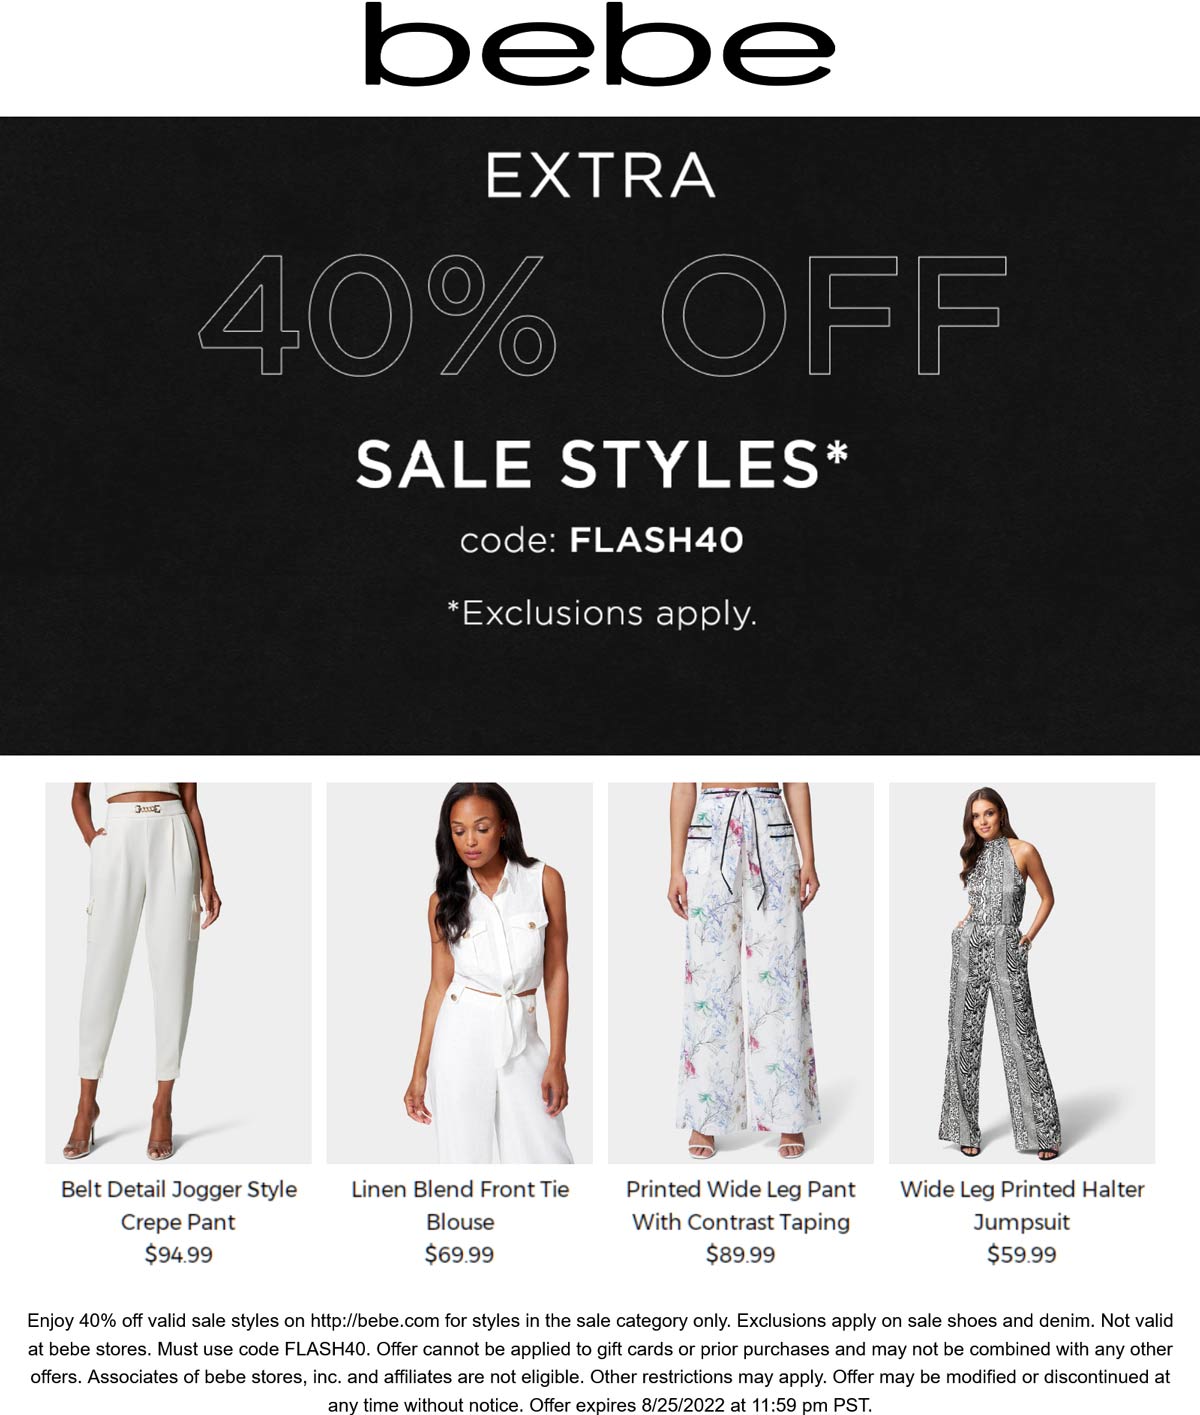 bebe stores Coupon  Extra 40% off sale styles today at bebe via promo code FLASH40 #bebe 